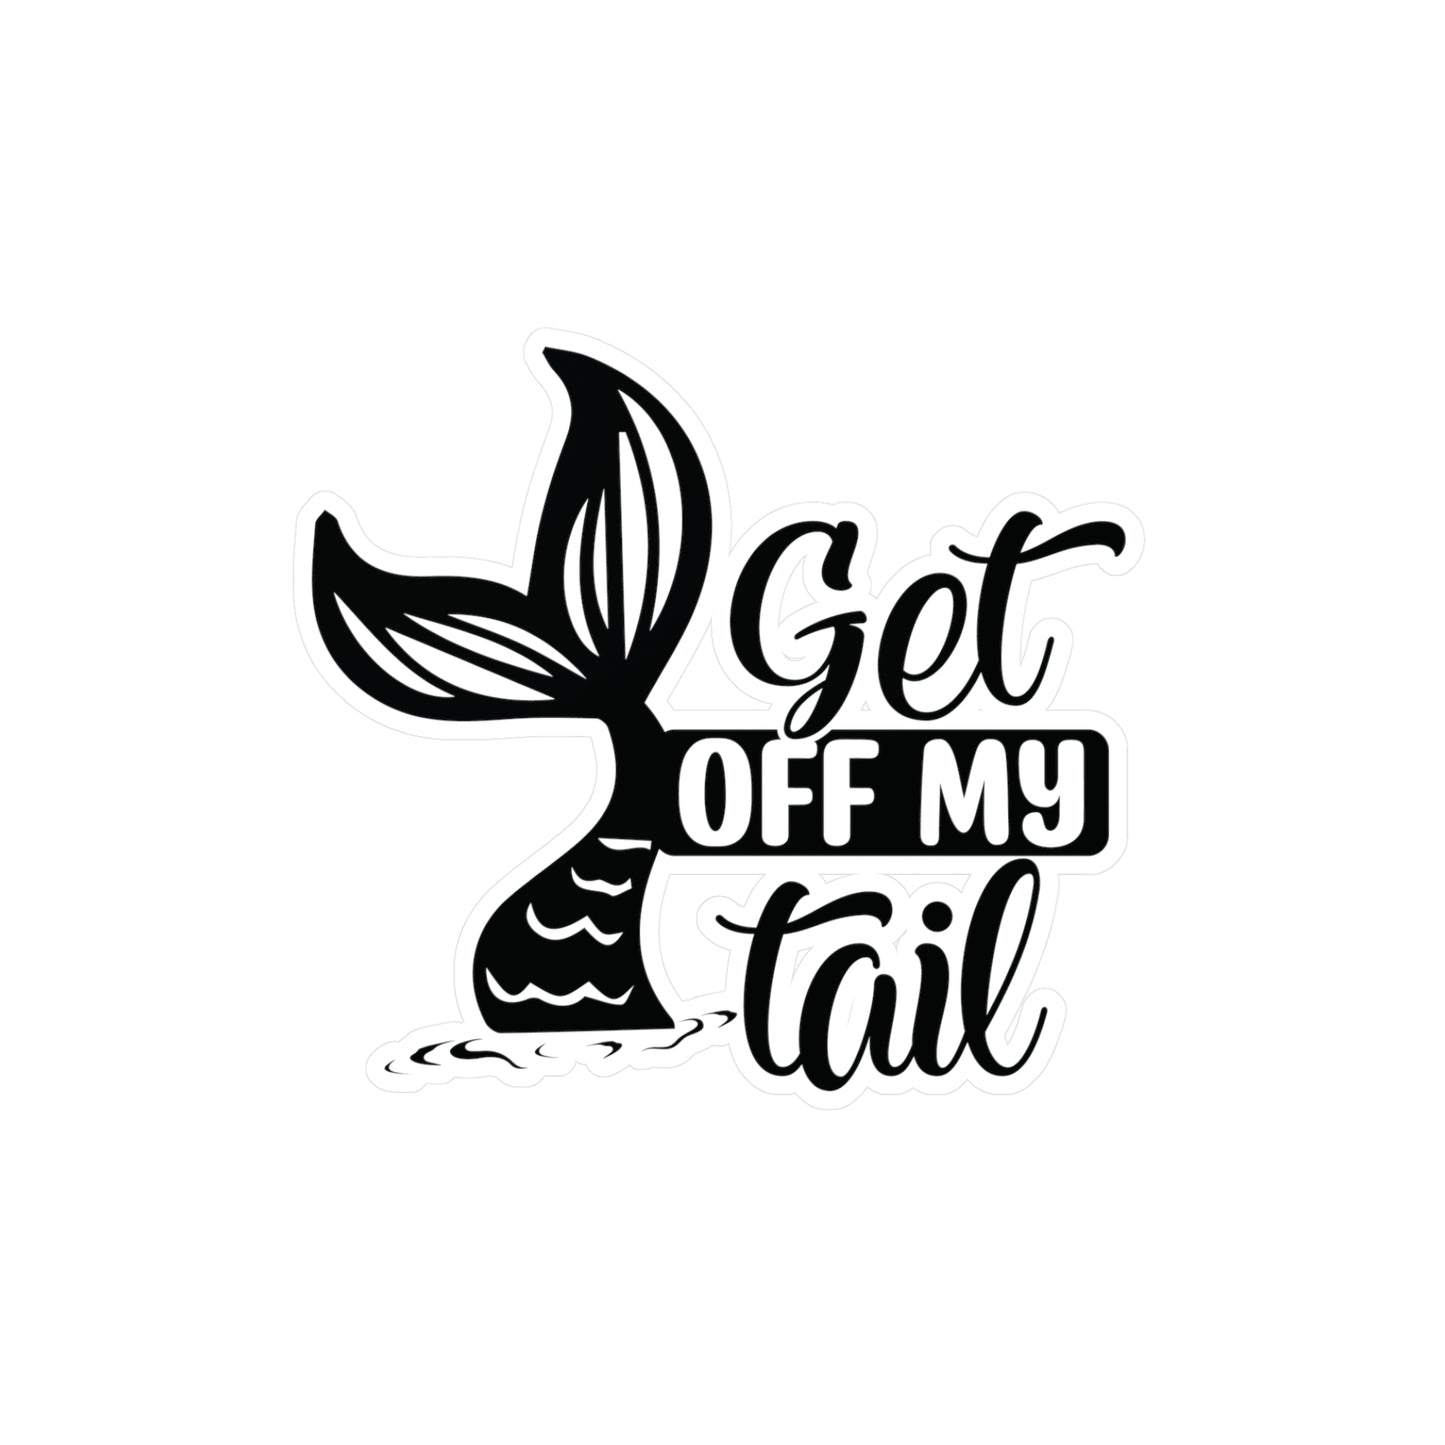 Get Off My Tail Funny Vinyl Car Sticker Decal Sticker Christmas Gift